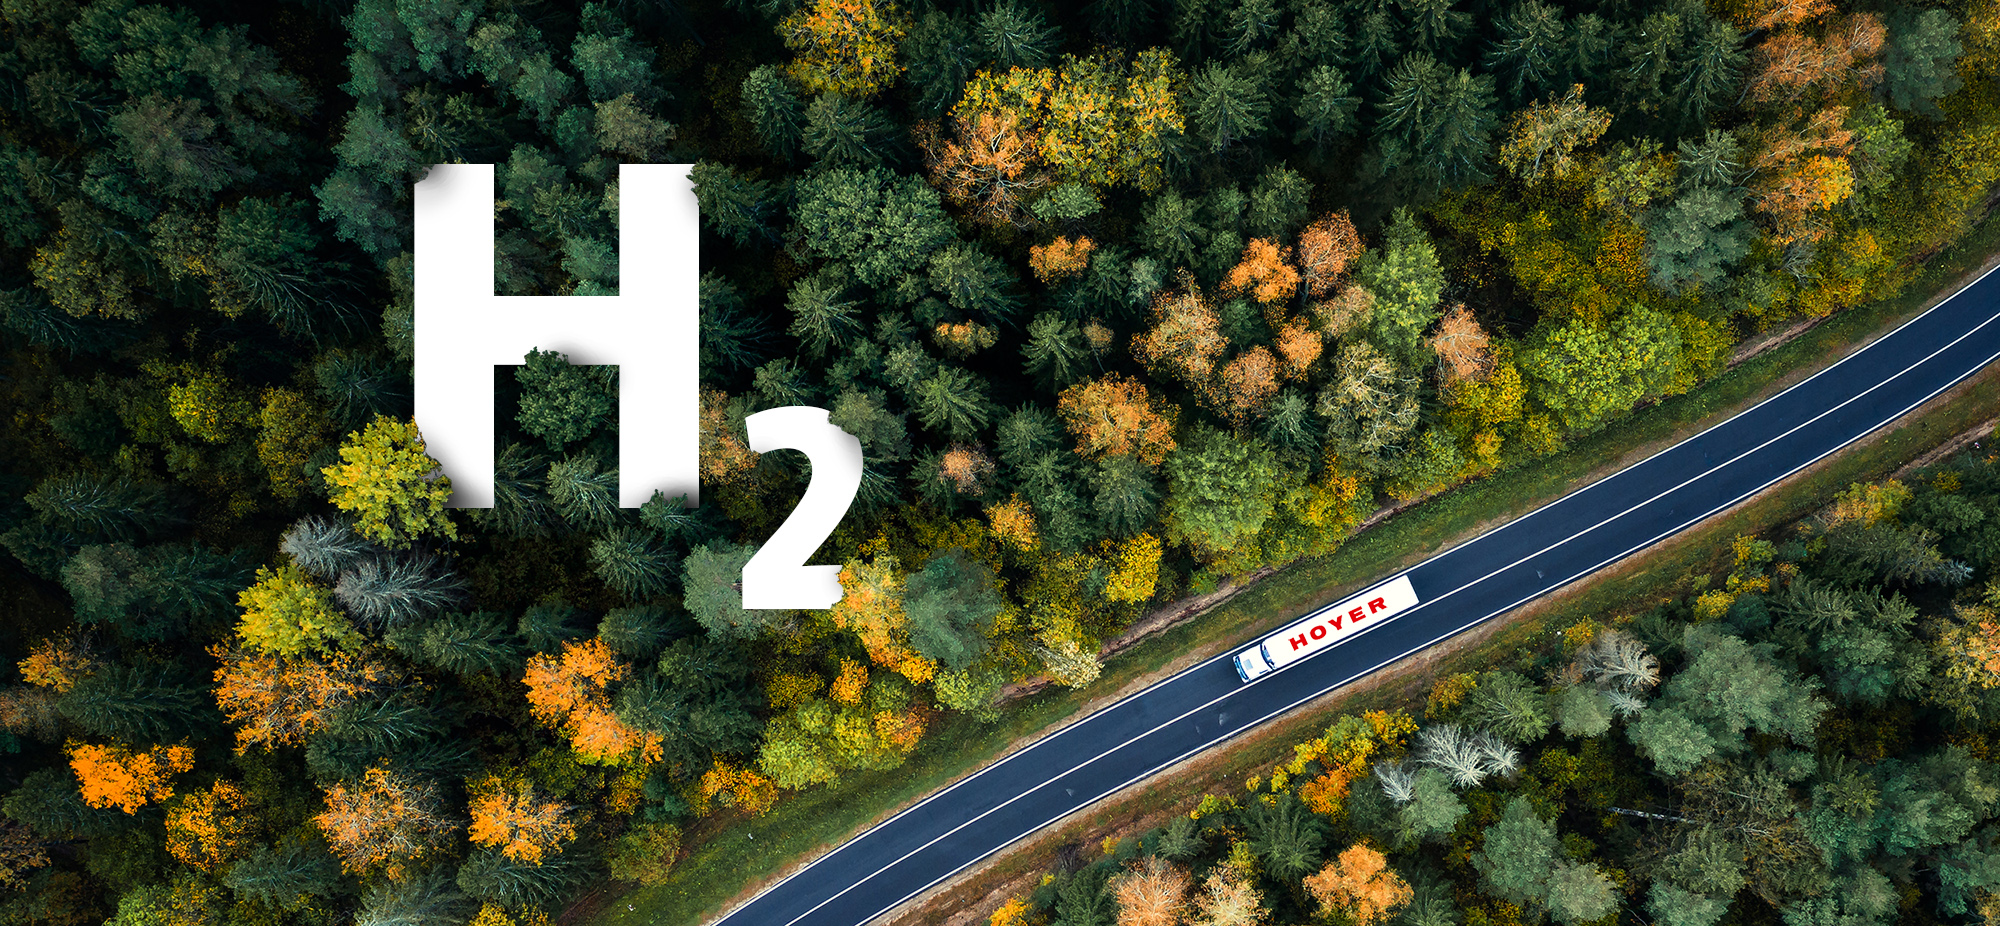 Aerial view of a white HOYER hydrogen transport truck on a road passing a wooded area. A large, white H2 logo pokes out of the forest from above.